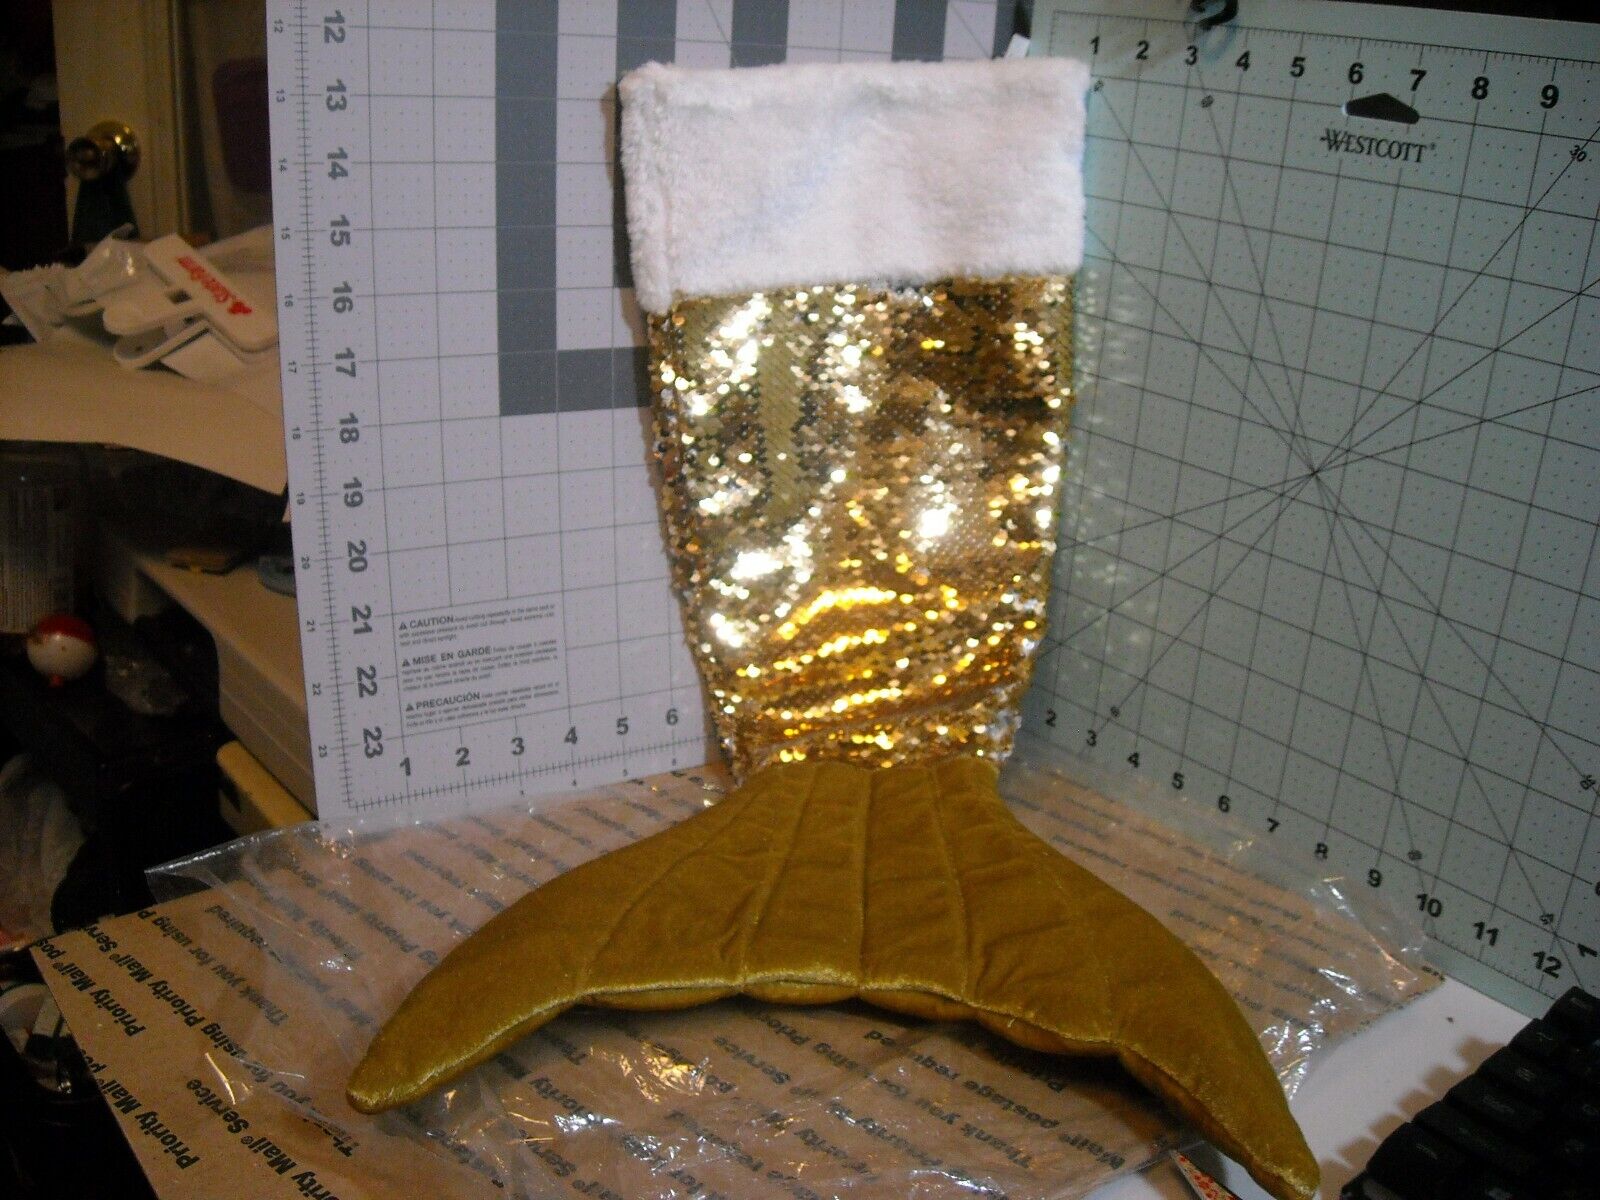 Delux Mermaid tail Christmas stocking 15X23.75 silver gold flip sequins reborn